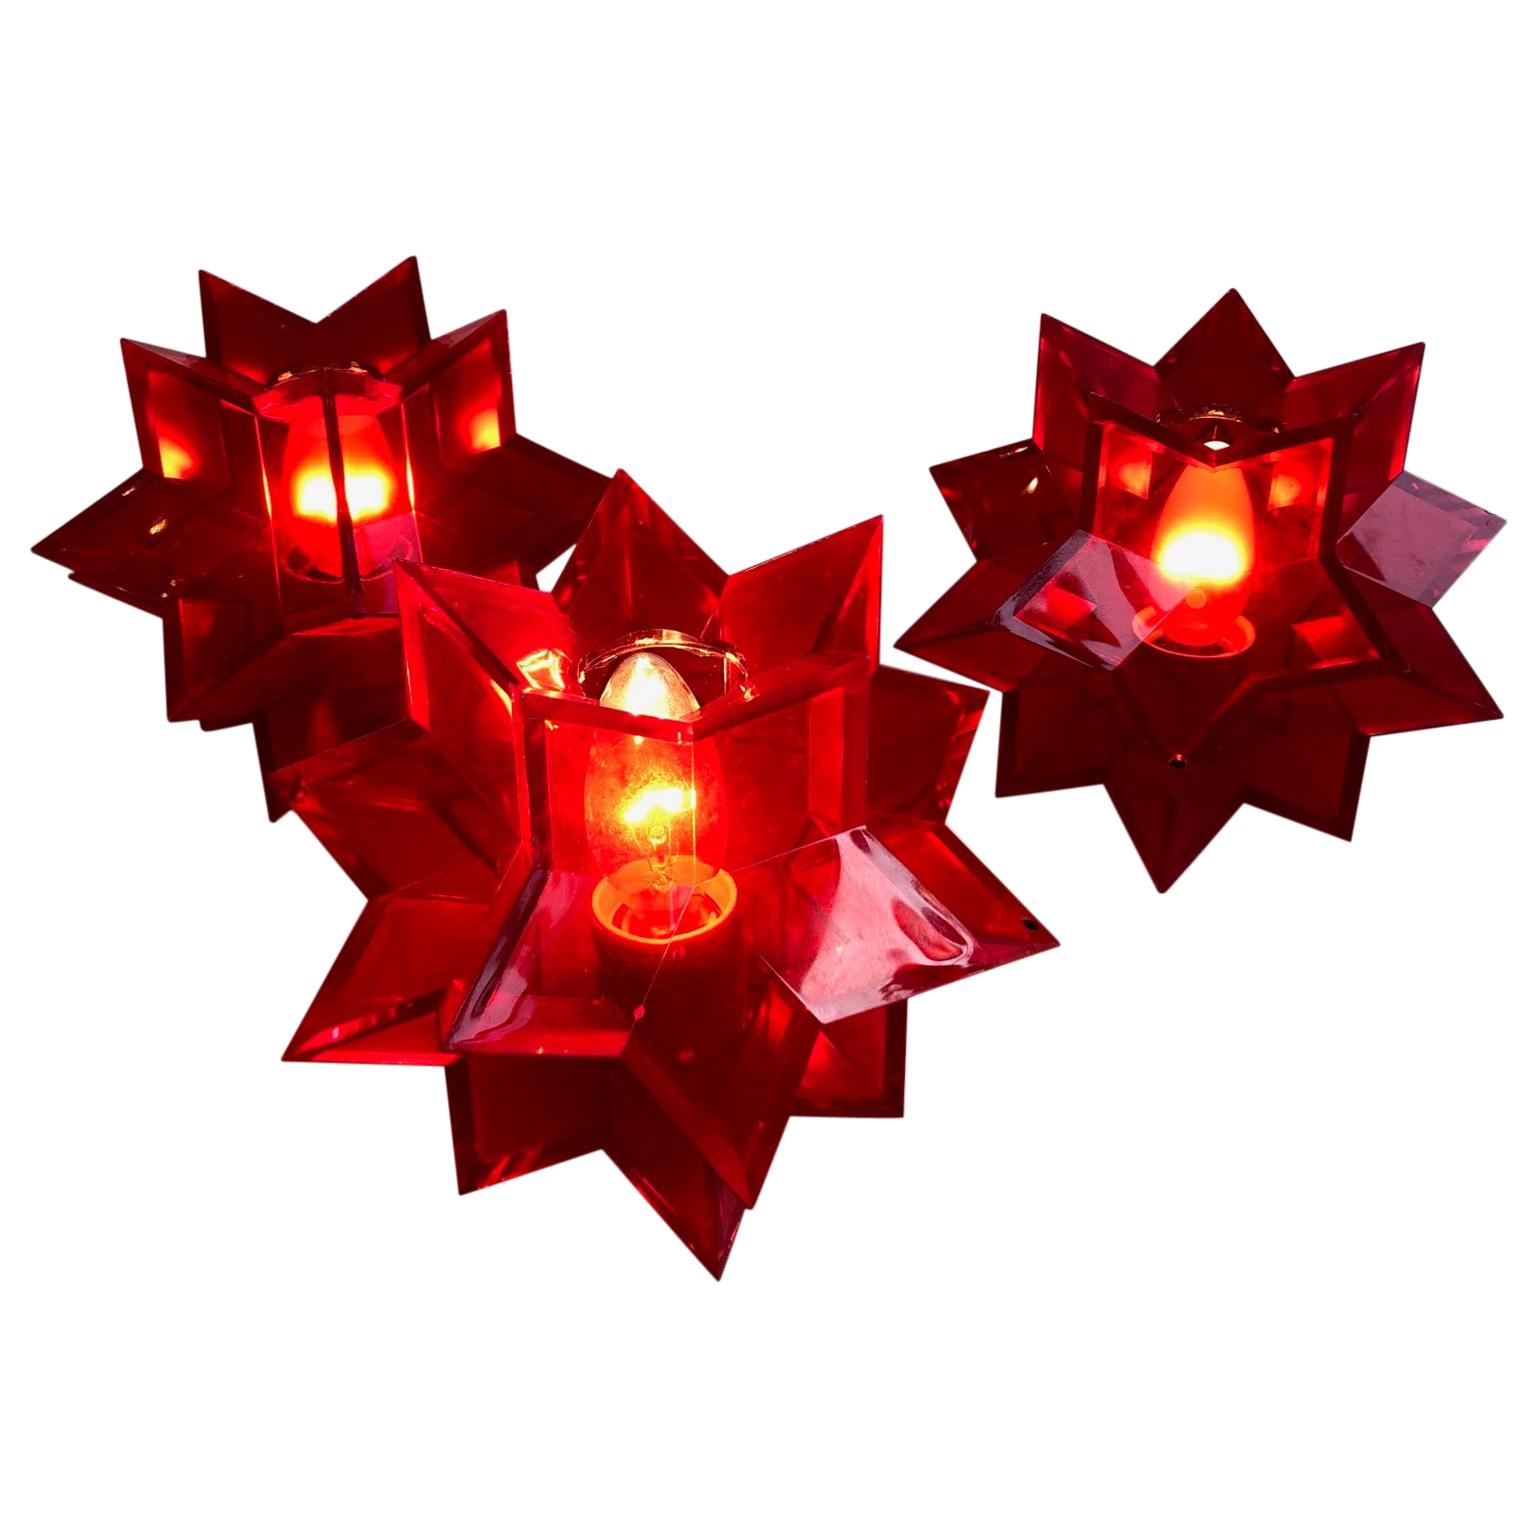 Mid-century Italian red acrylic perspex star shaped floor or table Lamps